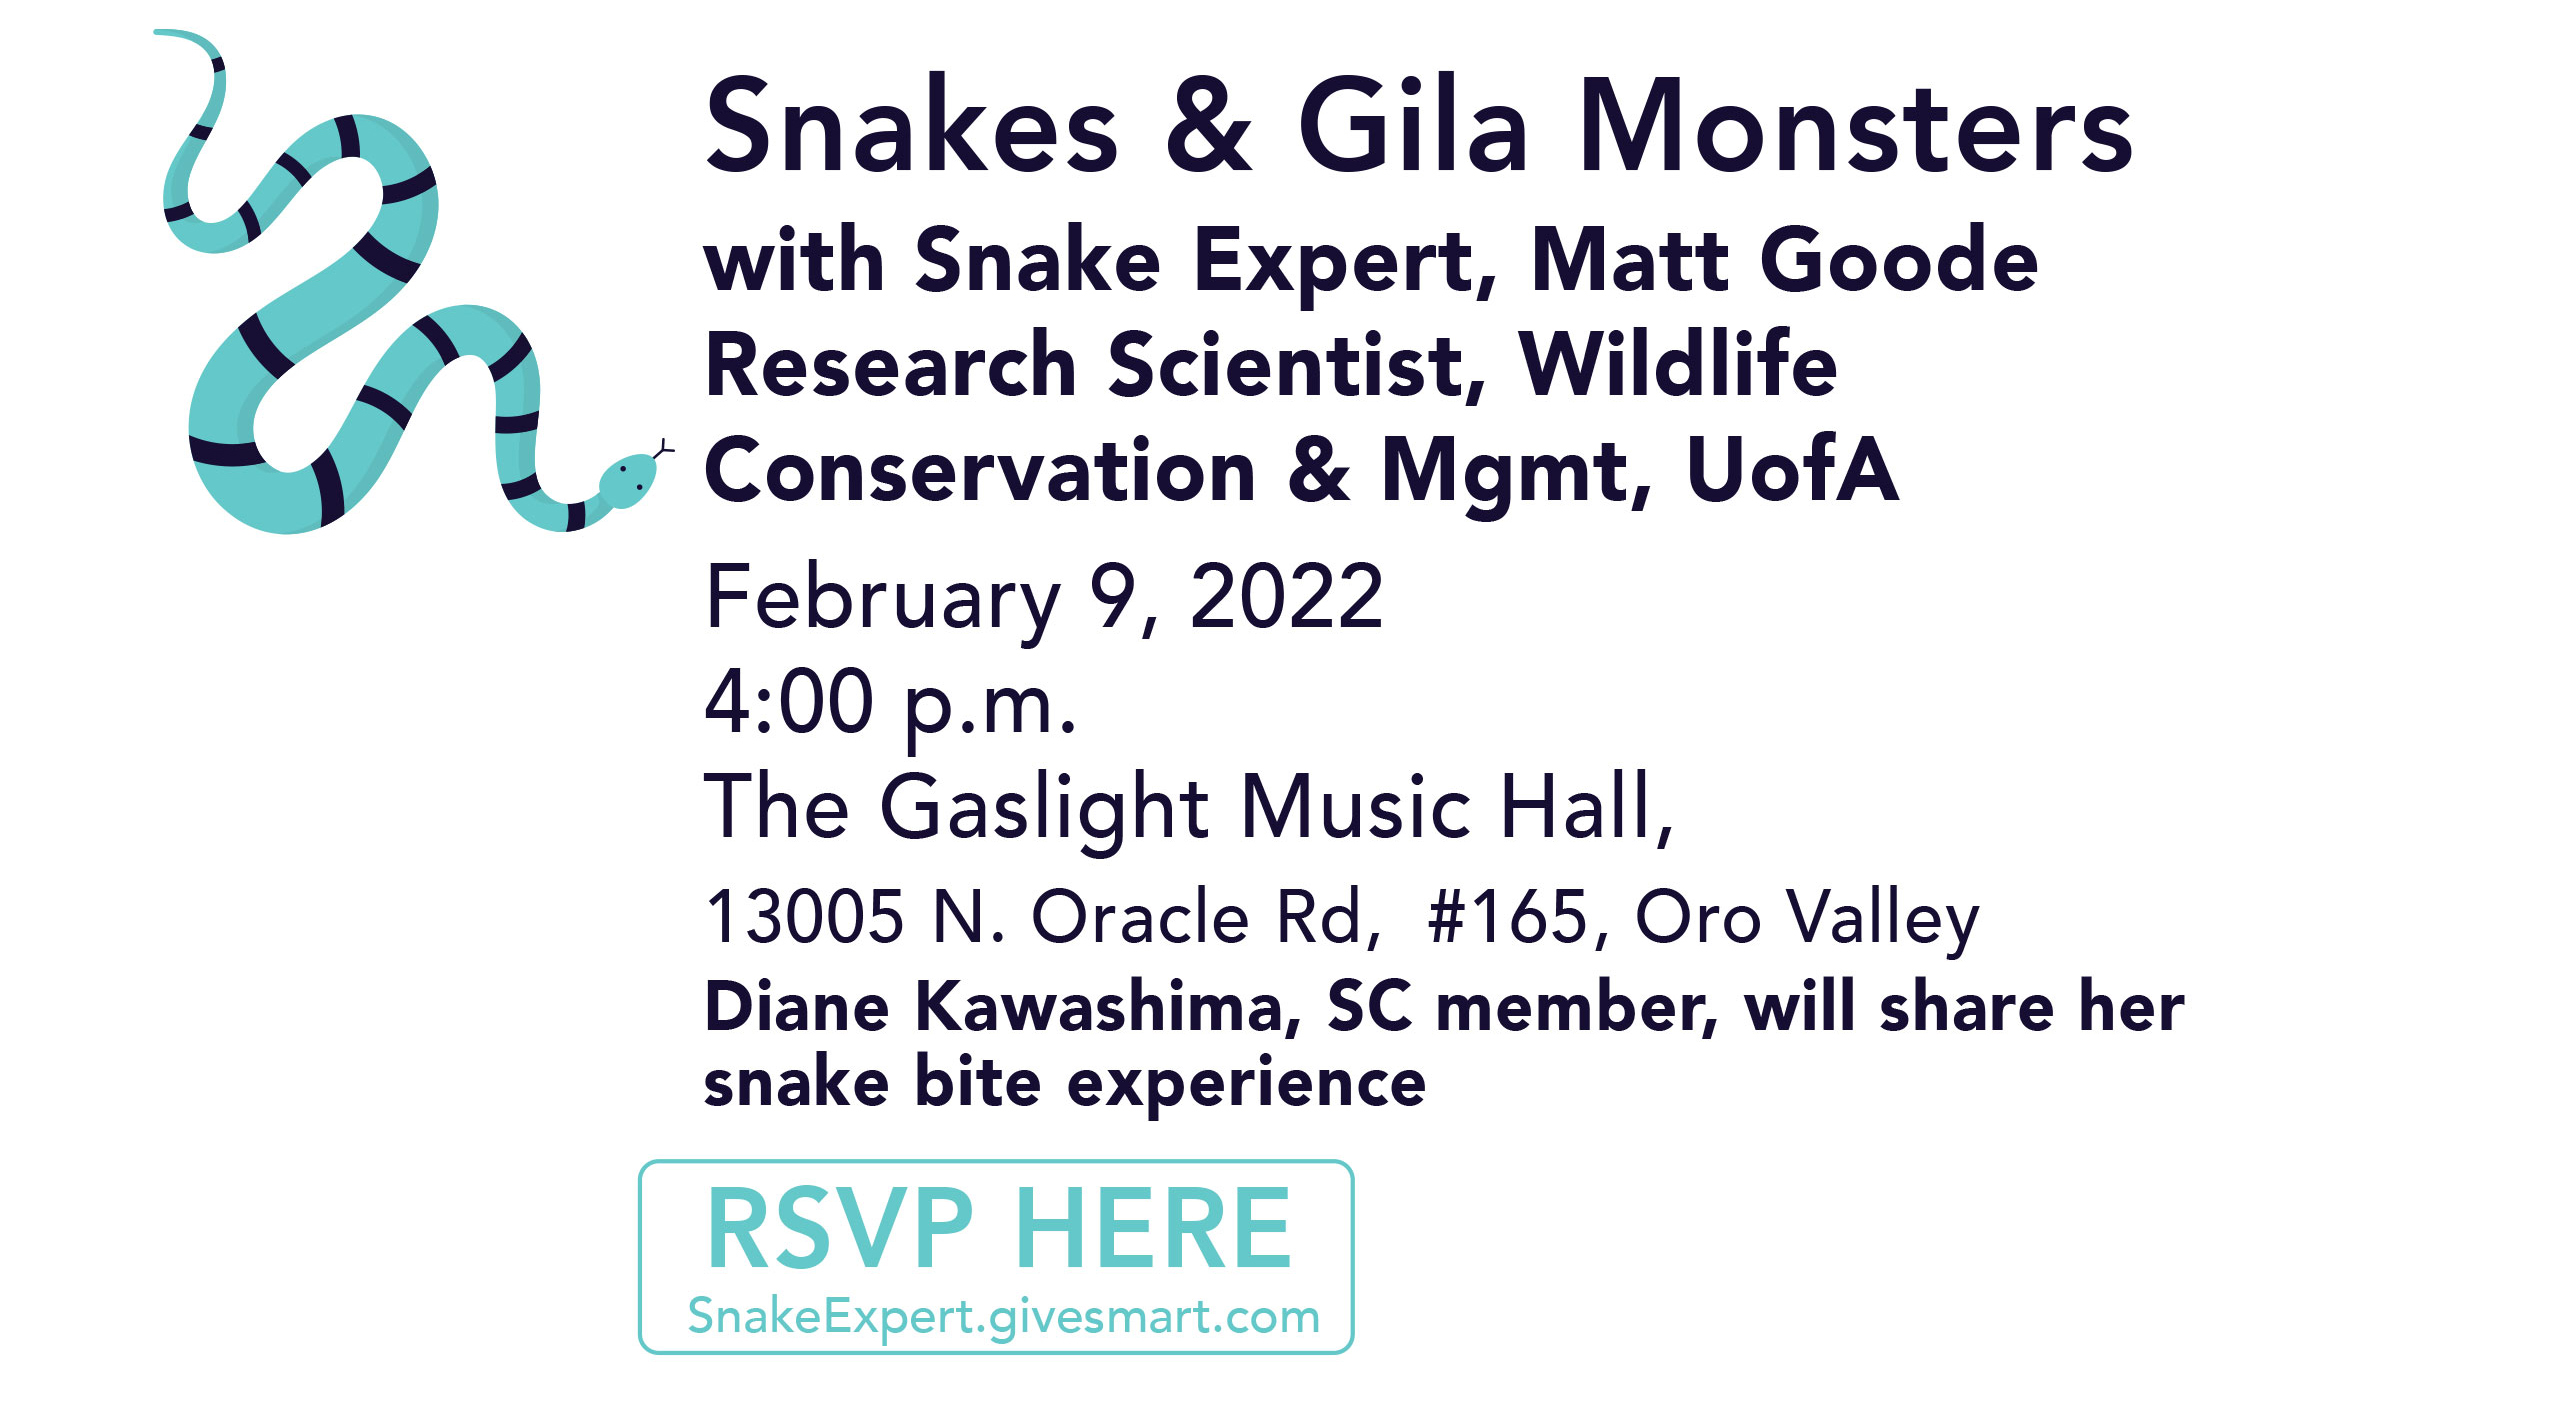 Stone Canyon Community Foundation - Snakes and Gila Monsters Event